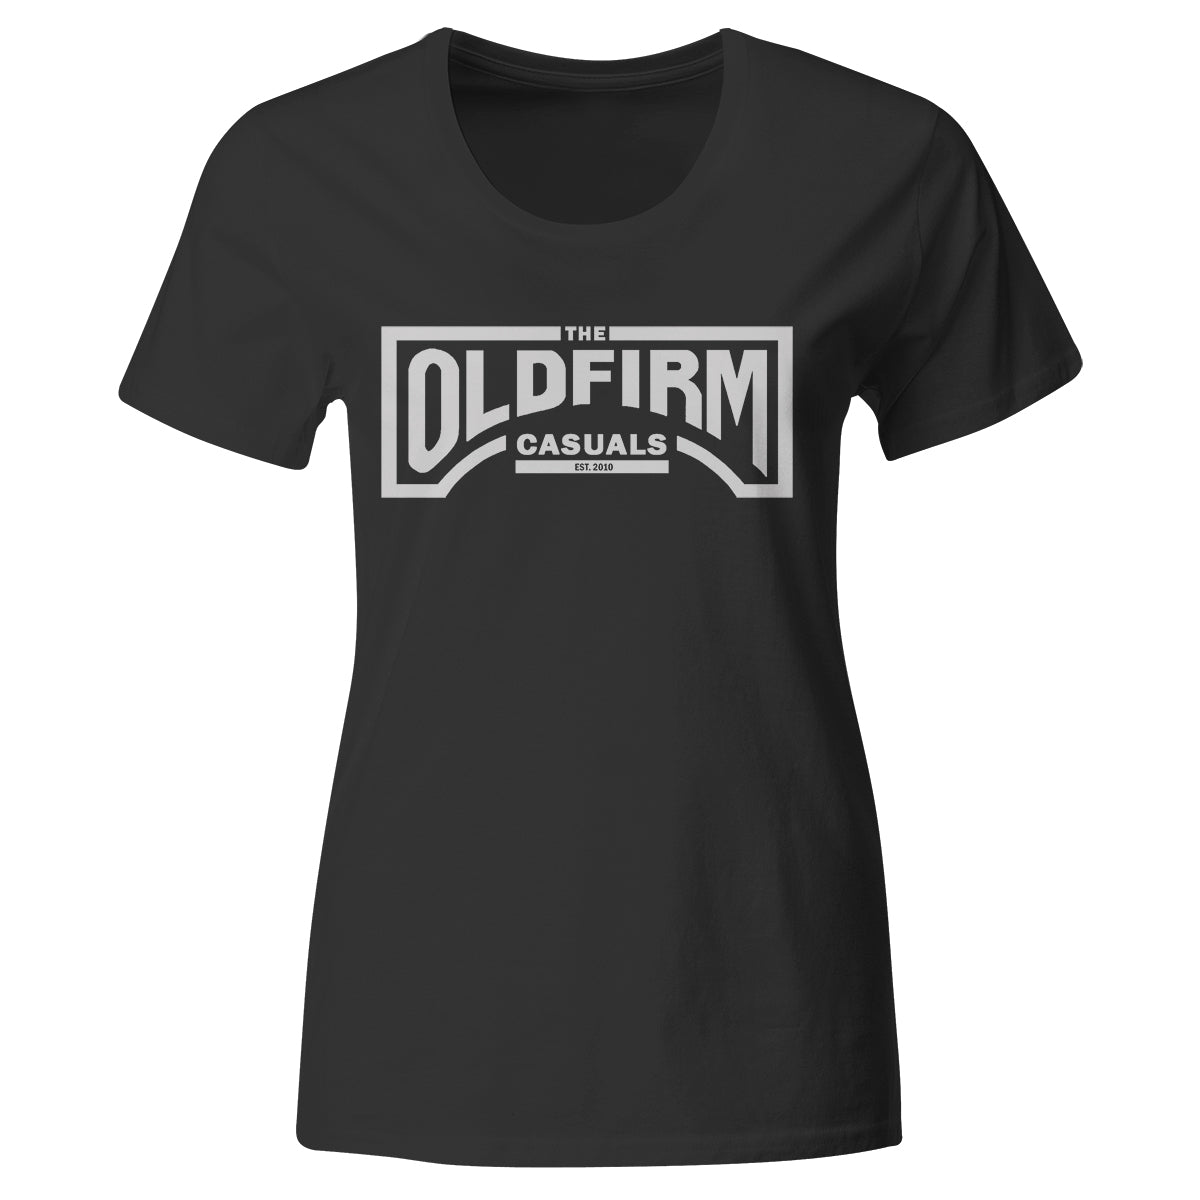 The Old Firm Casuals - Logo - Silver on Black - T-Shirt - Fitted